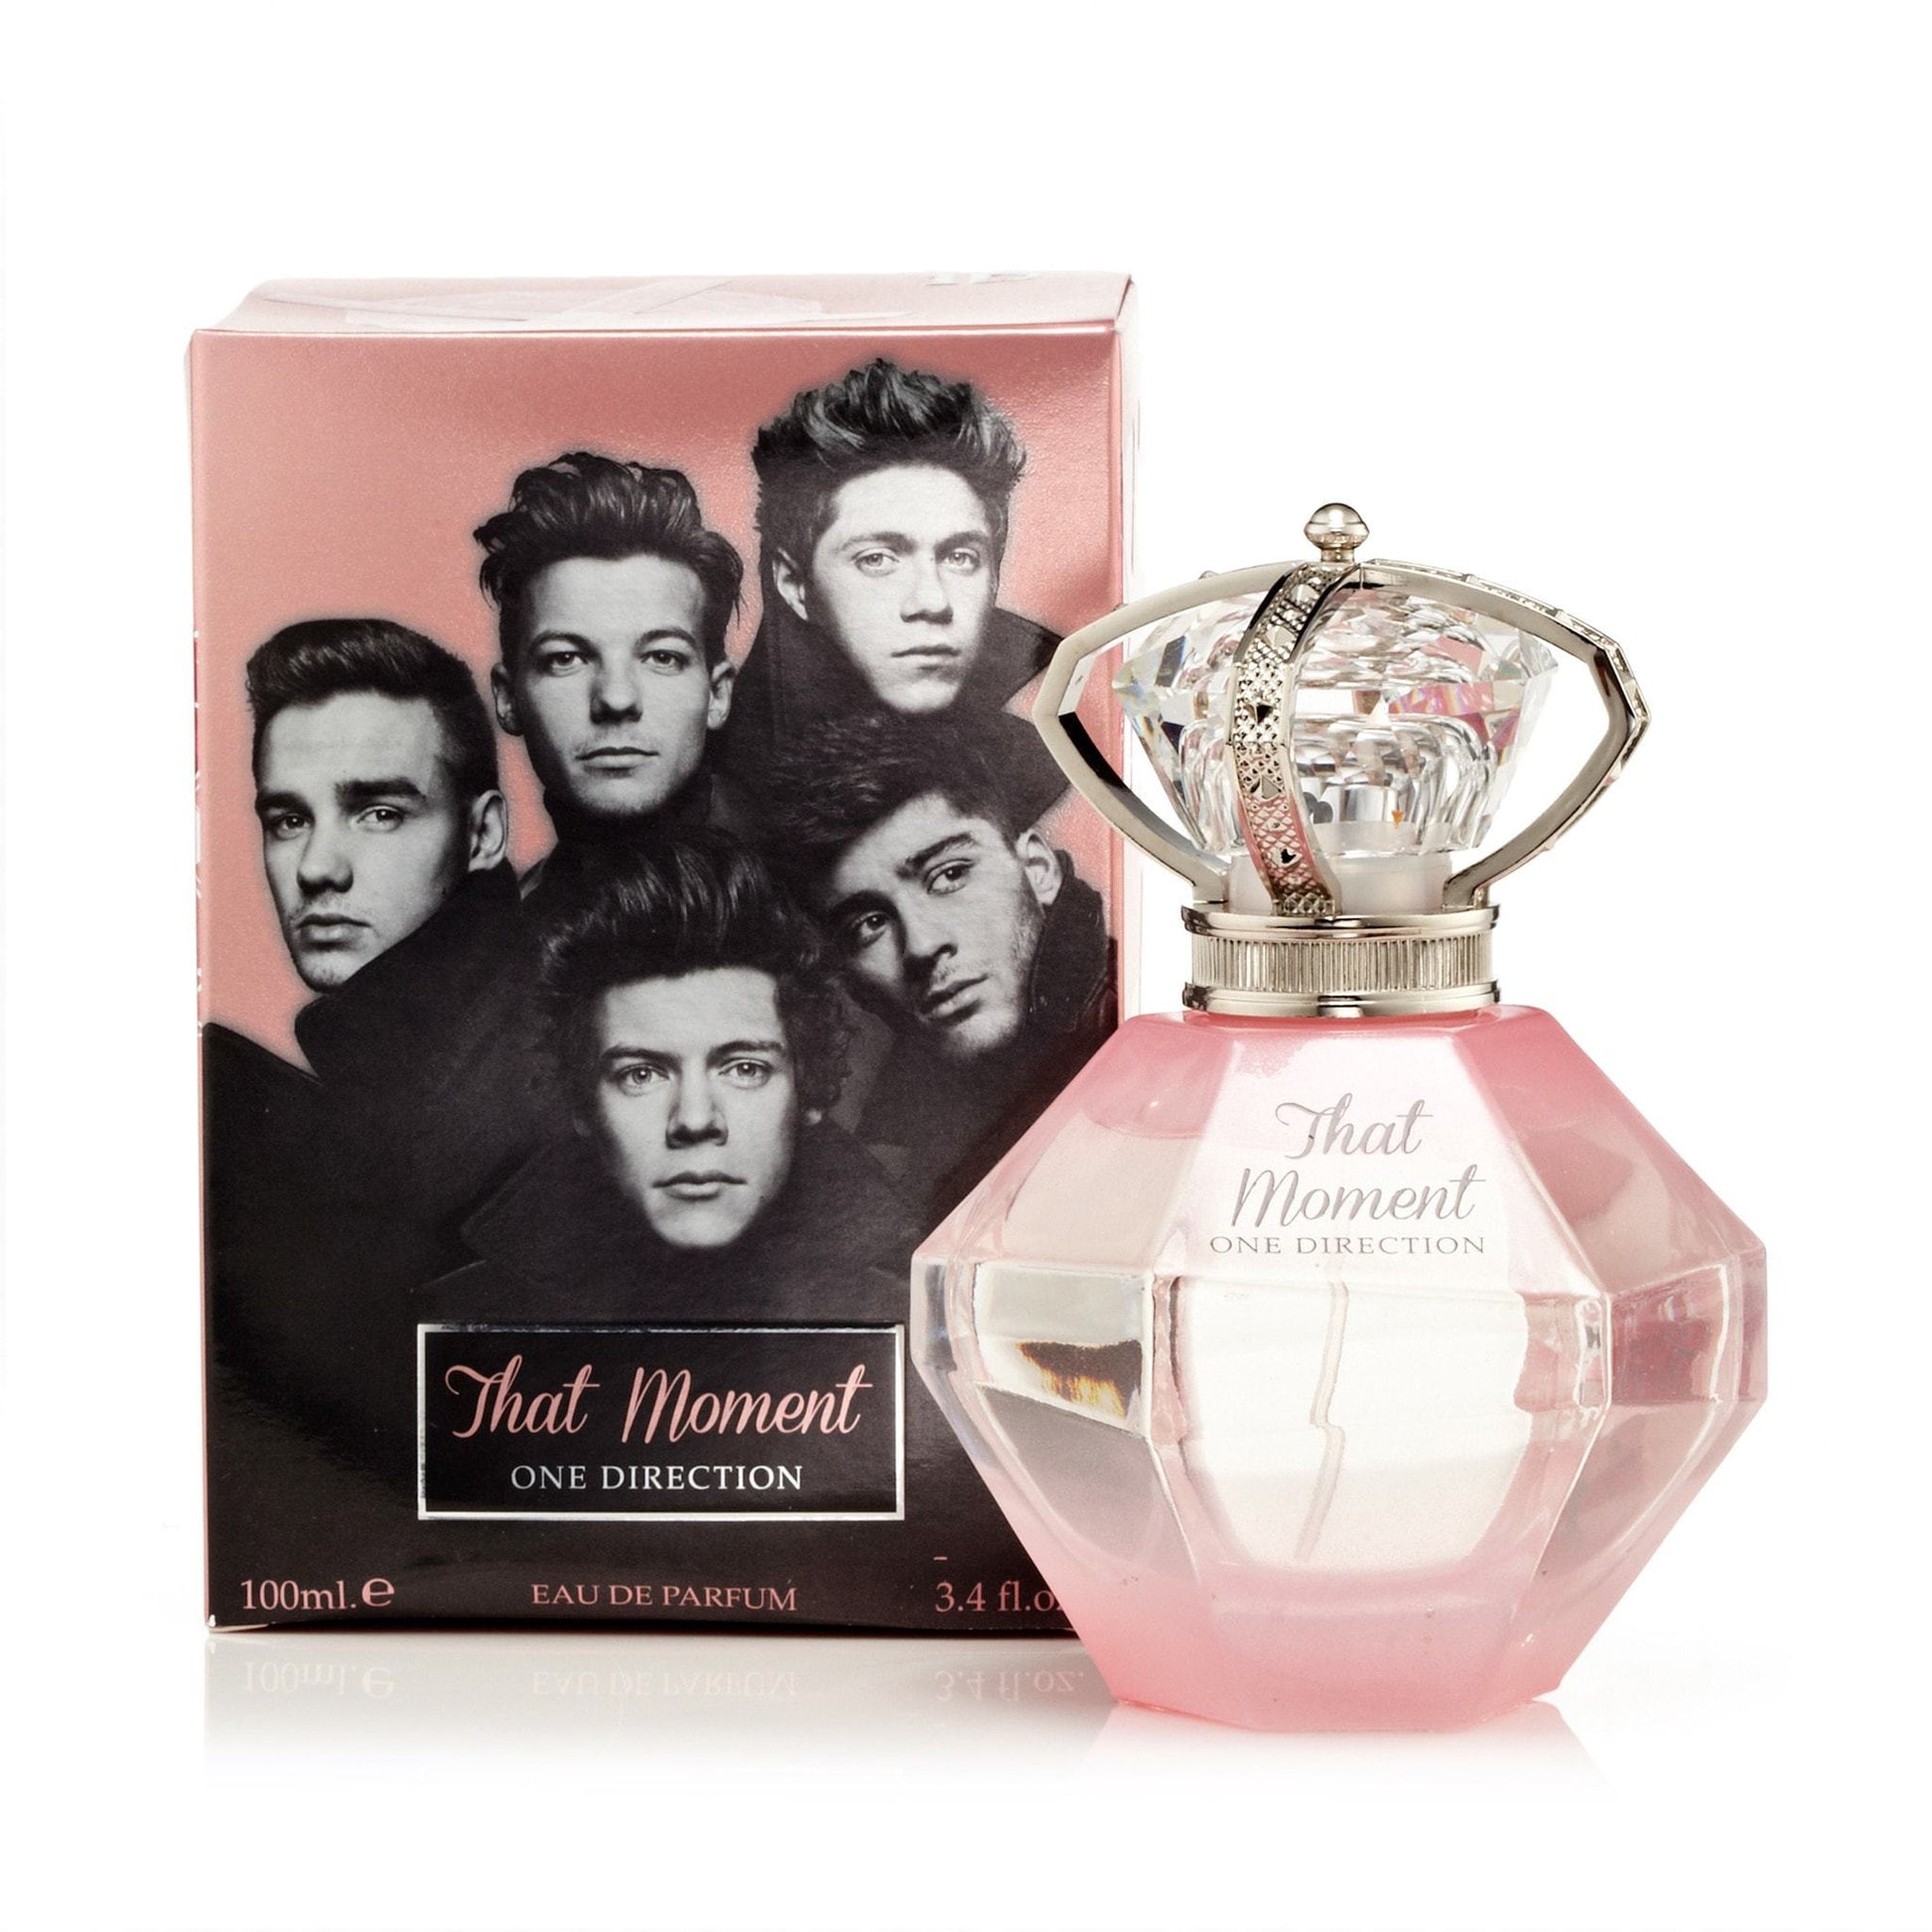 That Moment Eau de Parfum Spray for Women by One Direction, Product image 4